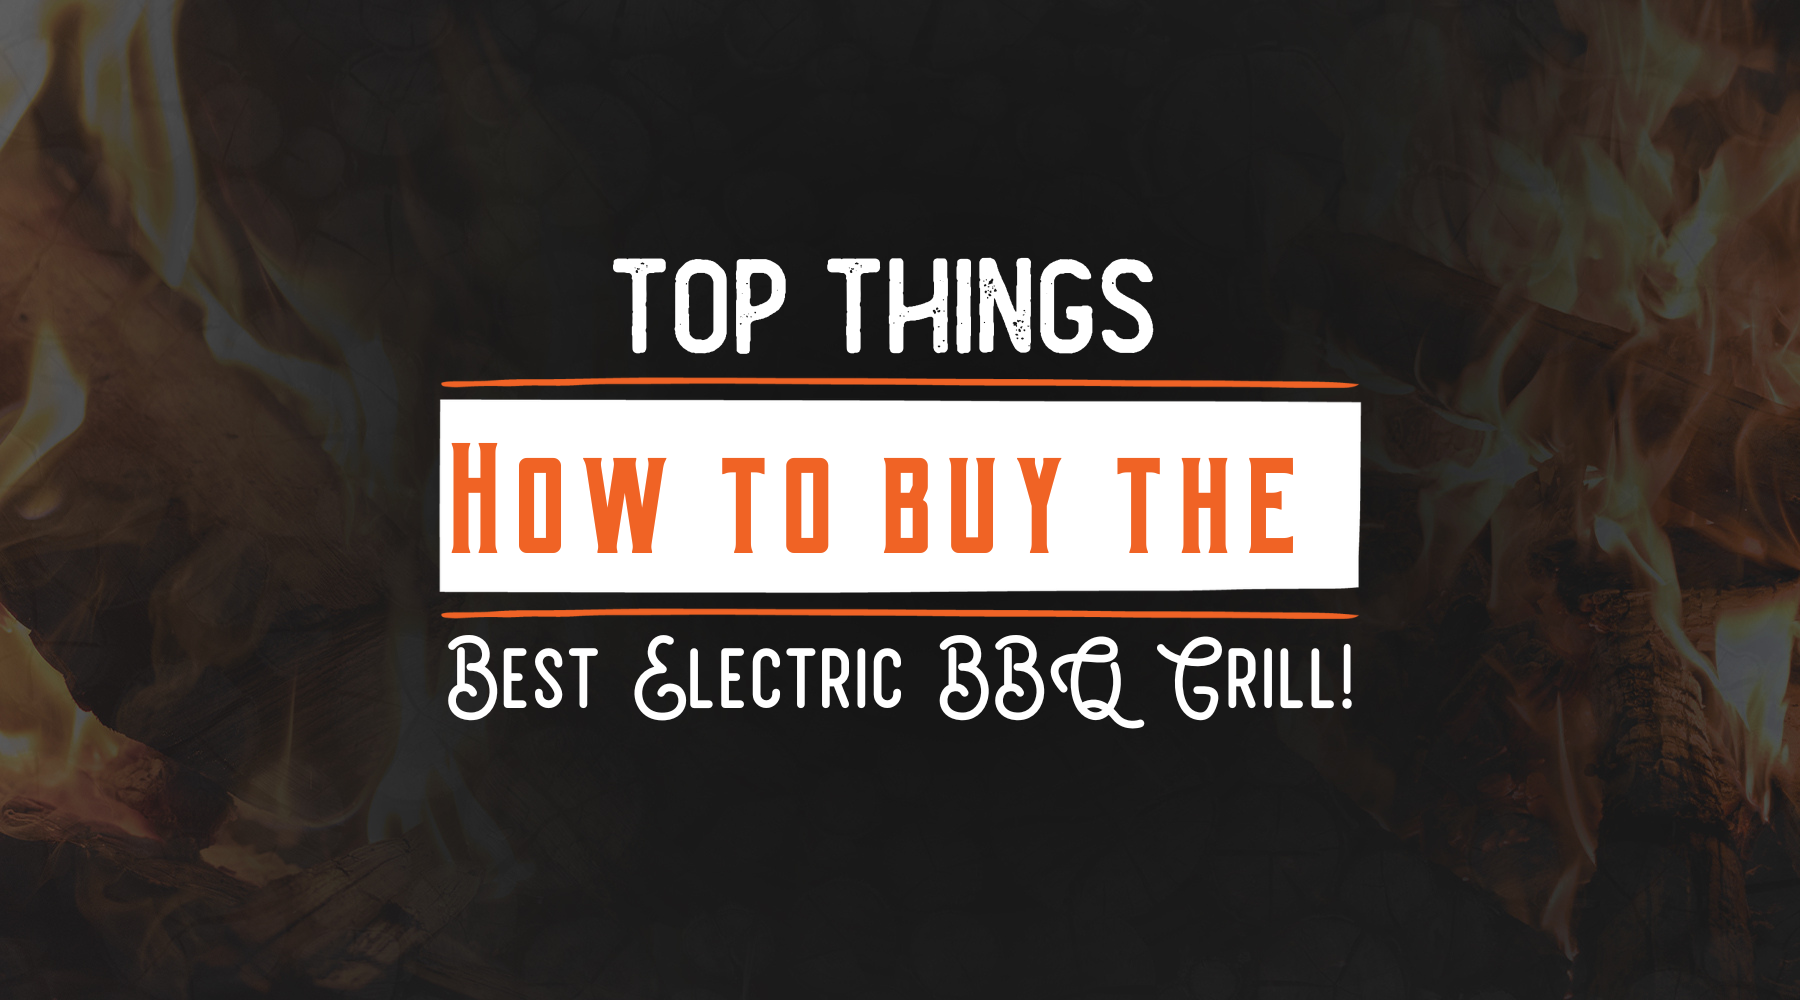 Top Things you should Know on how to Buy the Best Electric Grill